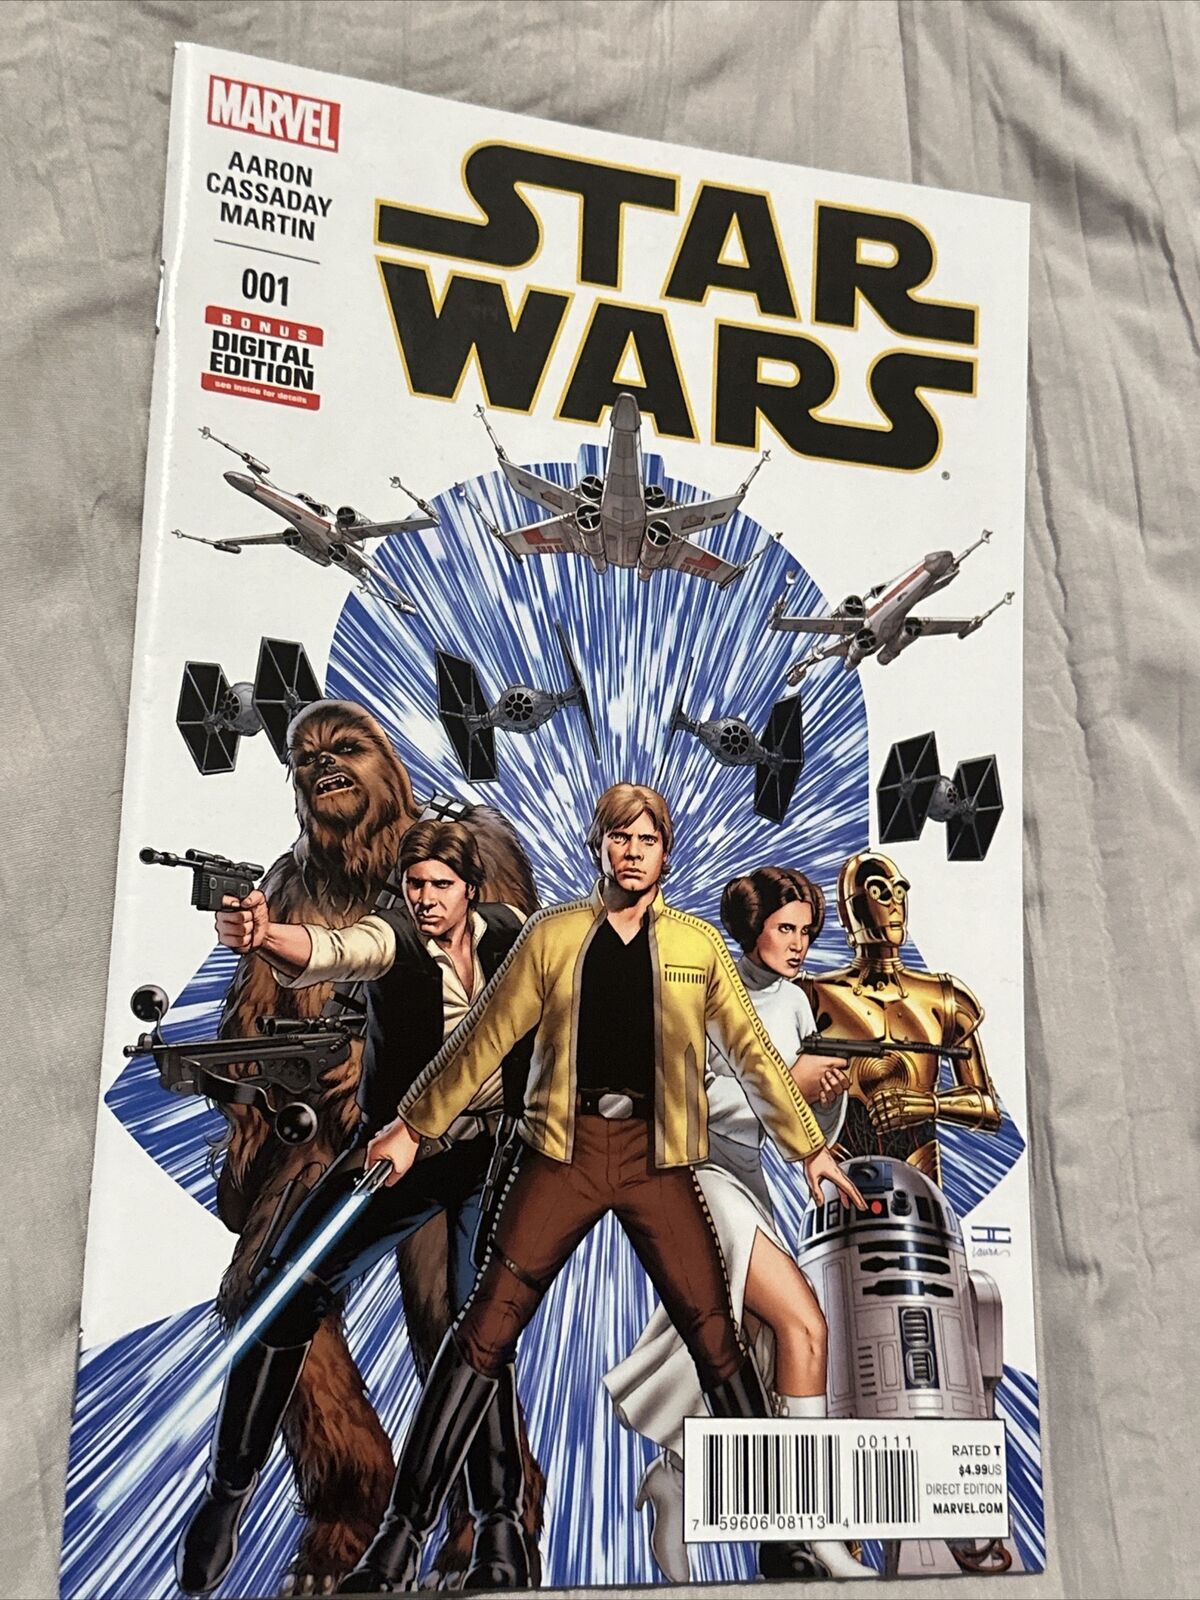 STAR WARS #1 VF/NM 1ST PRINT JOHN CASSADAY SIGN and NUMBERED 561/770 DF